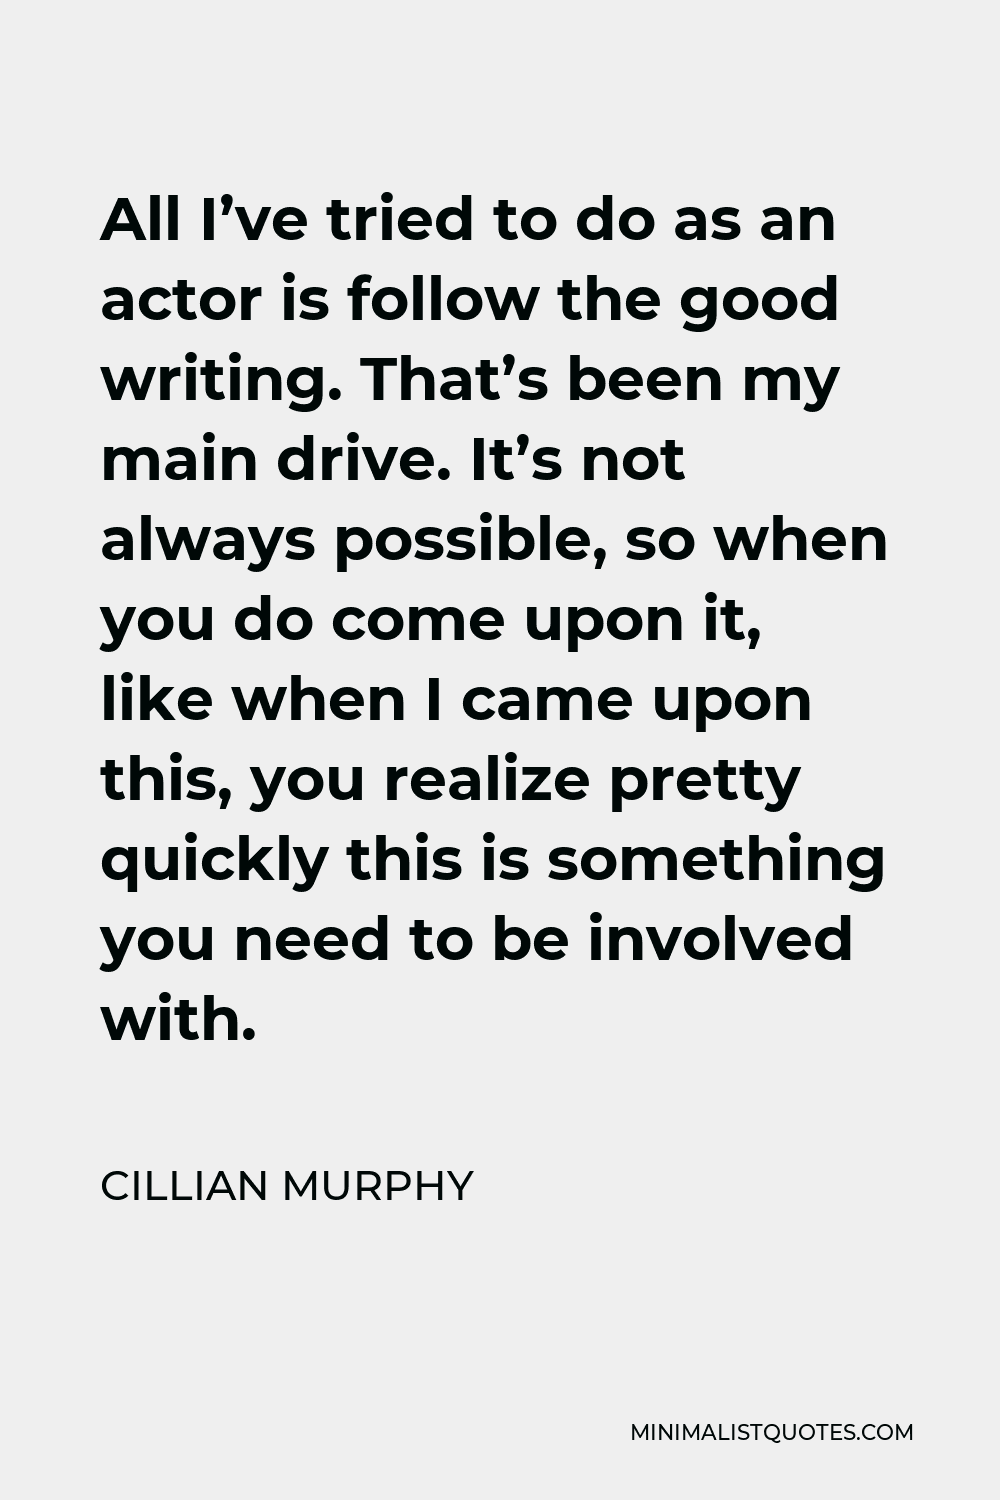 Cillian Murphy Quote - All I’ve tried to do as an actor is follow the good writing. That’s been my main drive. It’s not always possible, so when you do come upon it, like when I came upon this, you realize pretty quickly this is something you need to be involved with.